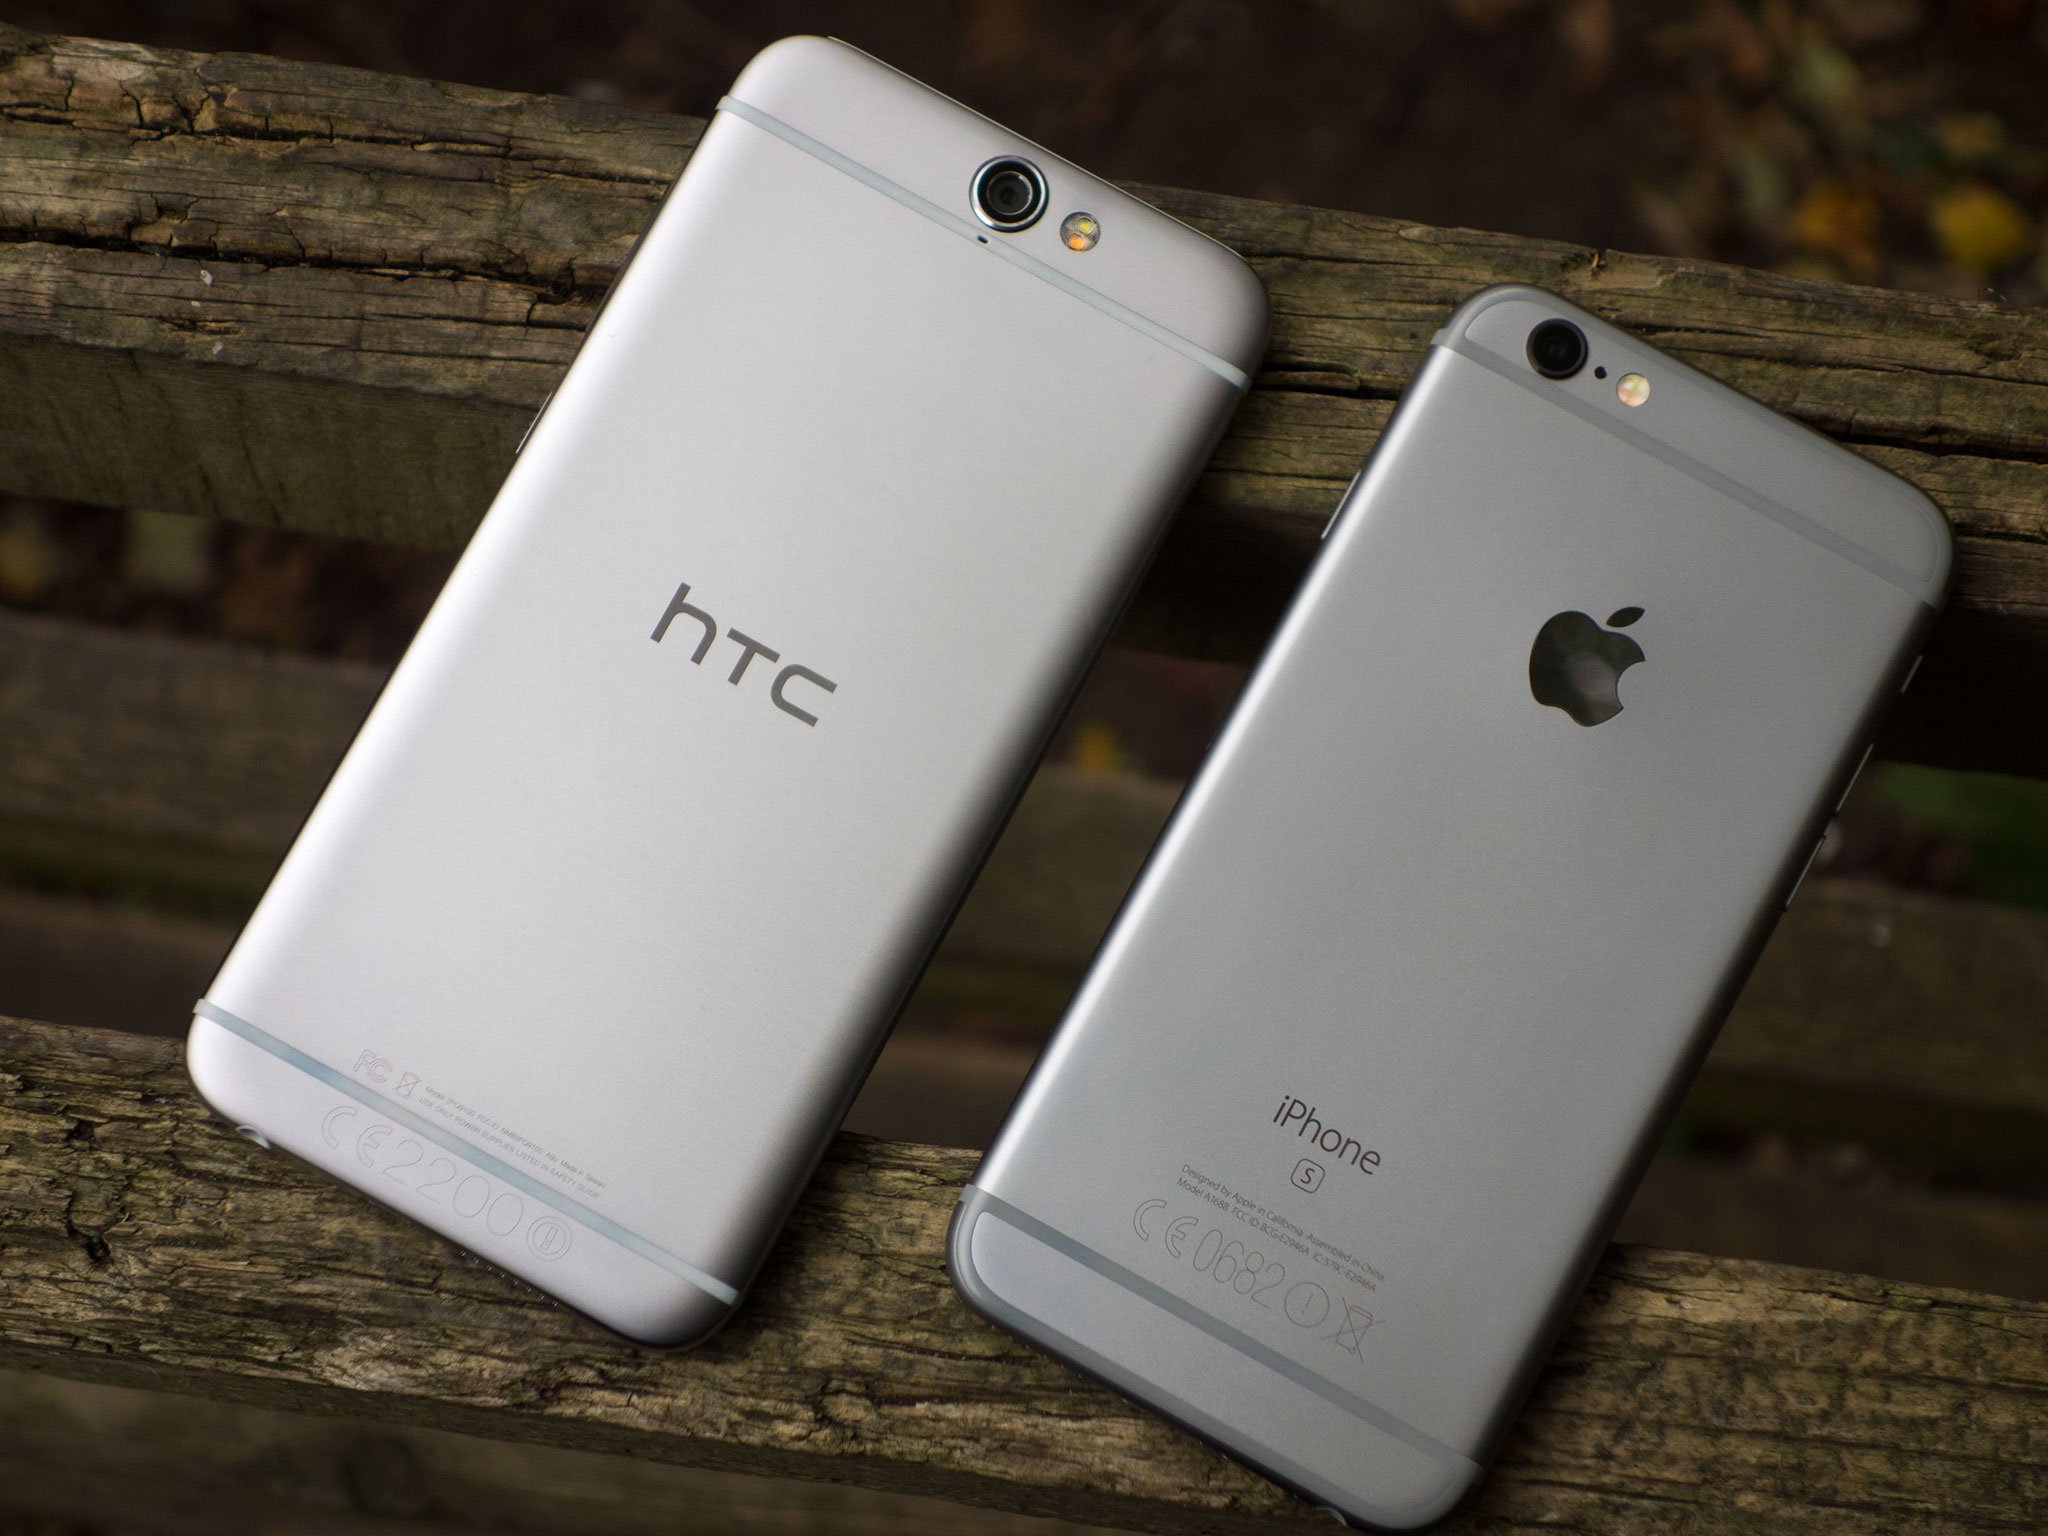 HTC One A9 and iPhone 6s